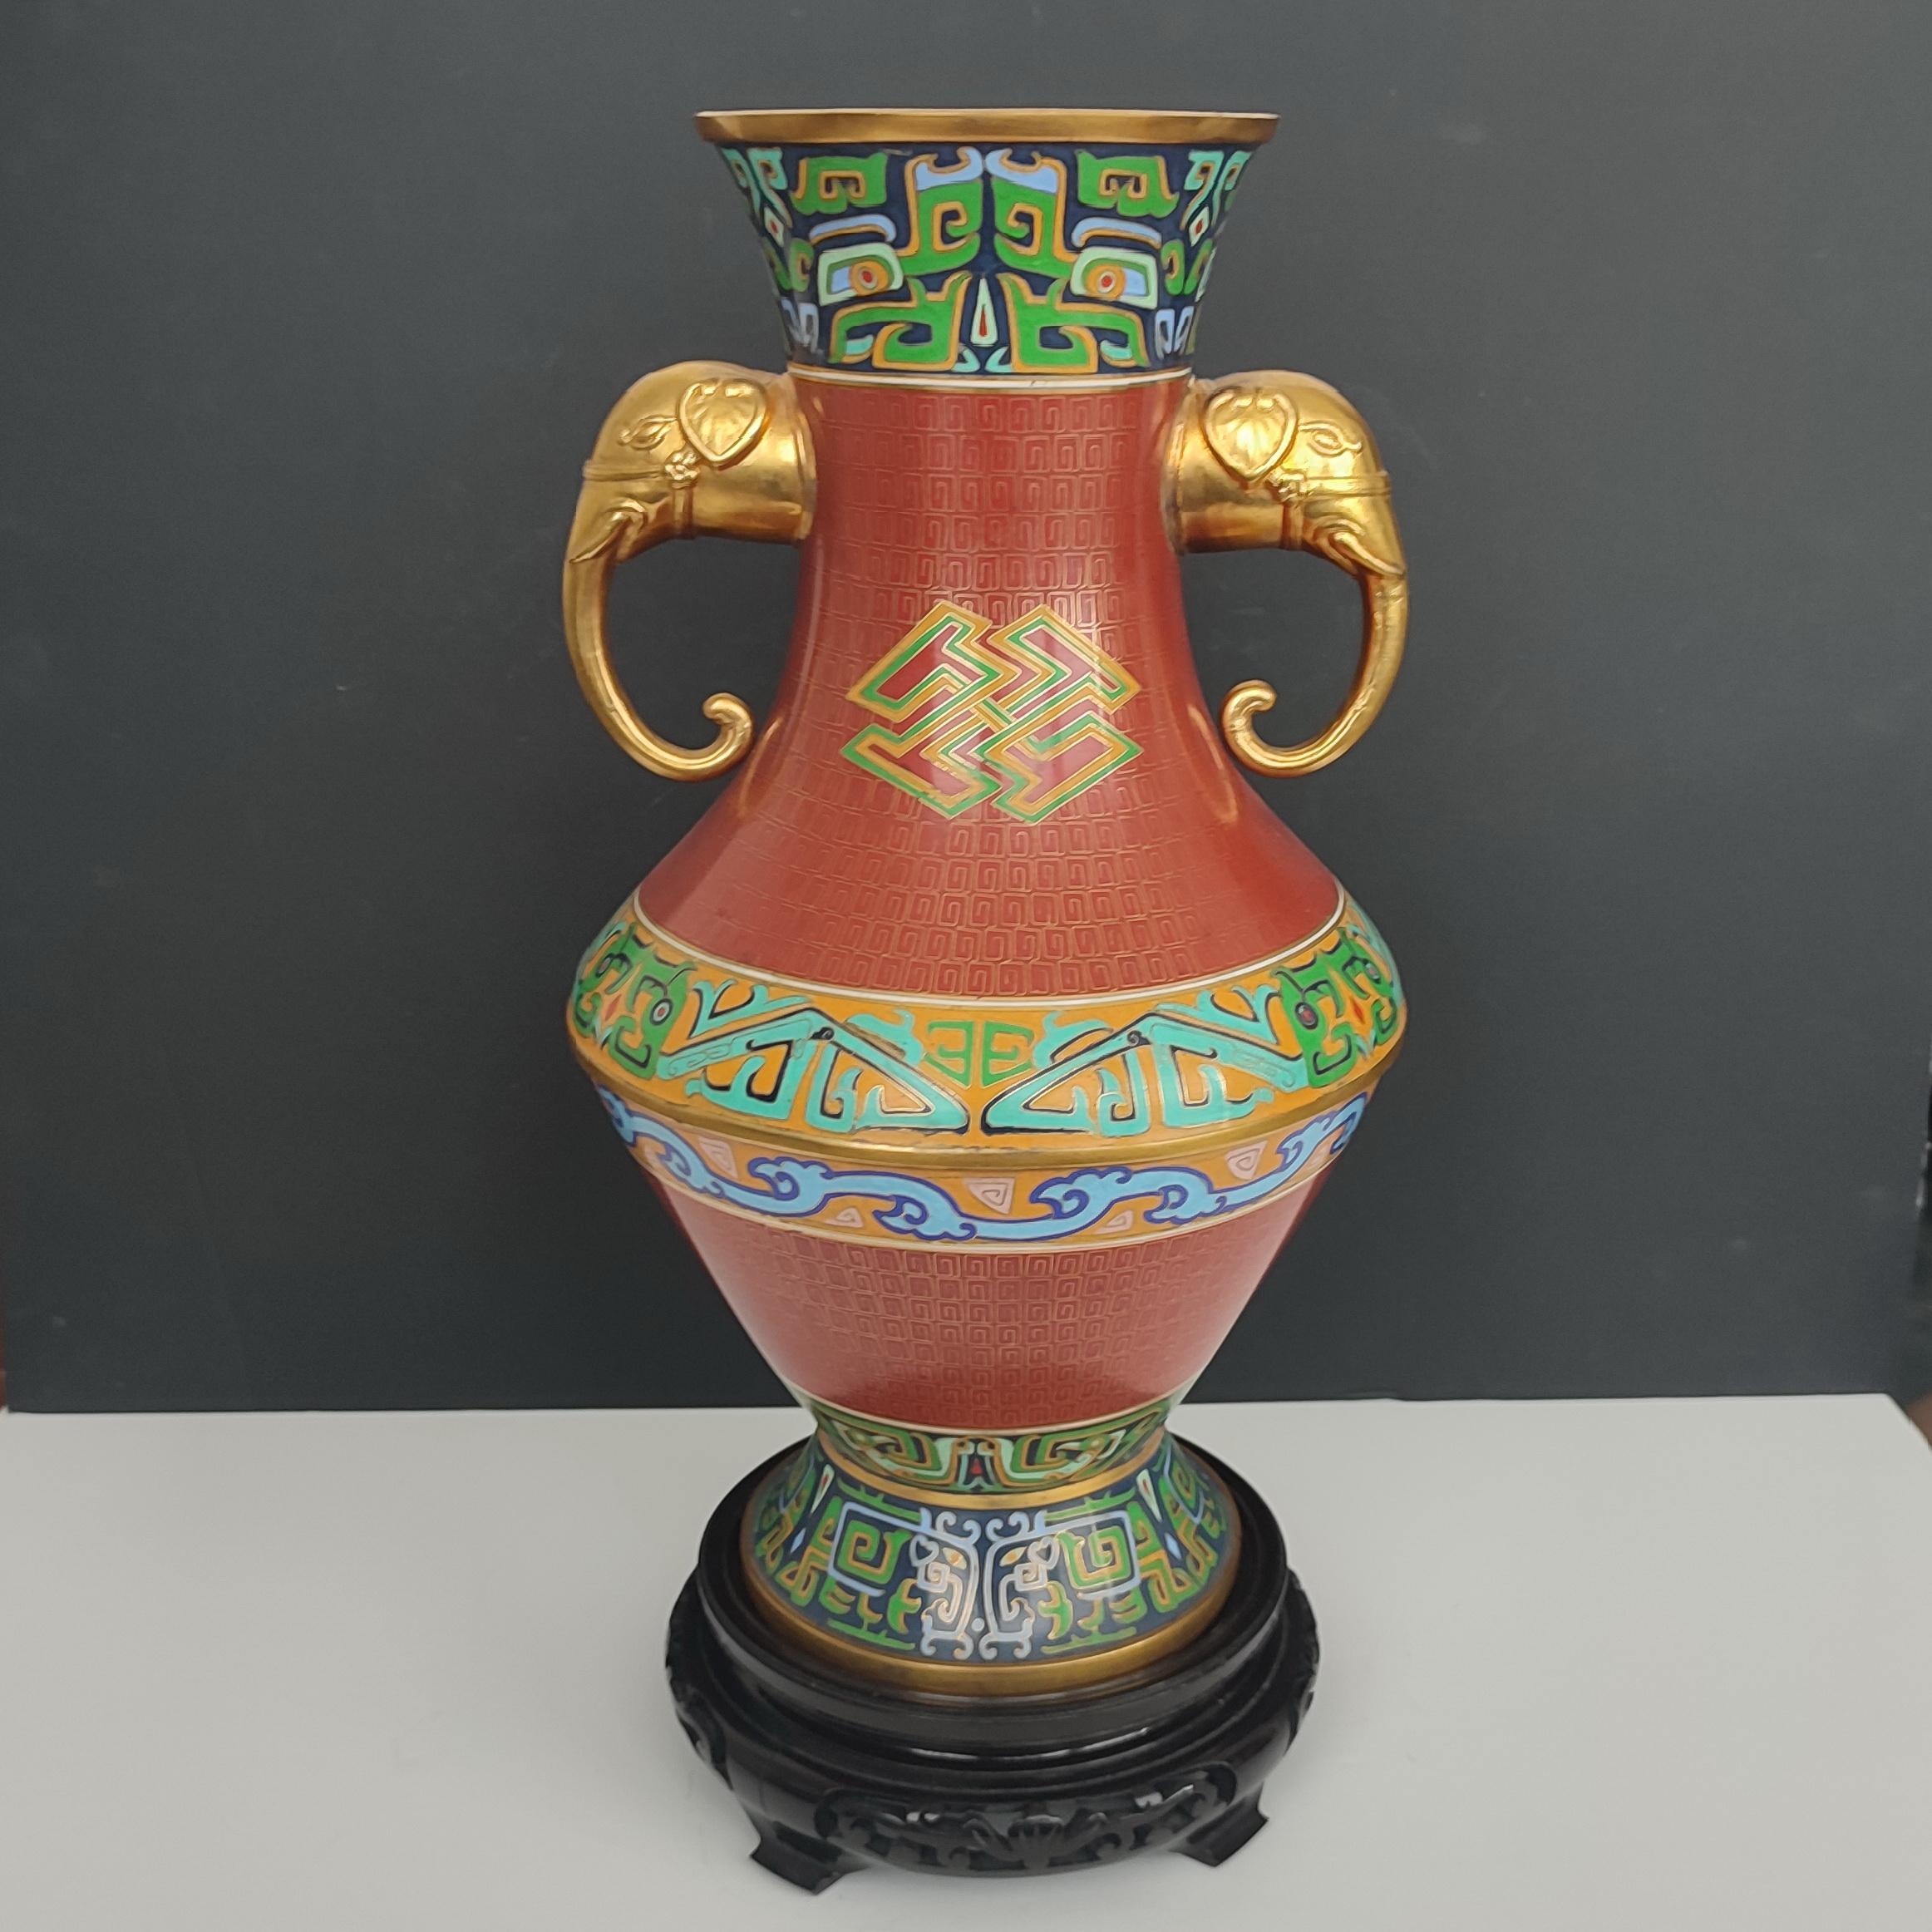 Cloisonné enameled vase with elephant handles, Japan, mid-20th century. The elegant body form is enhanced with gilt brass rings, separating the different décor areas, and two gilt elephant handles. The piece has a dark rich cinnabar red ground